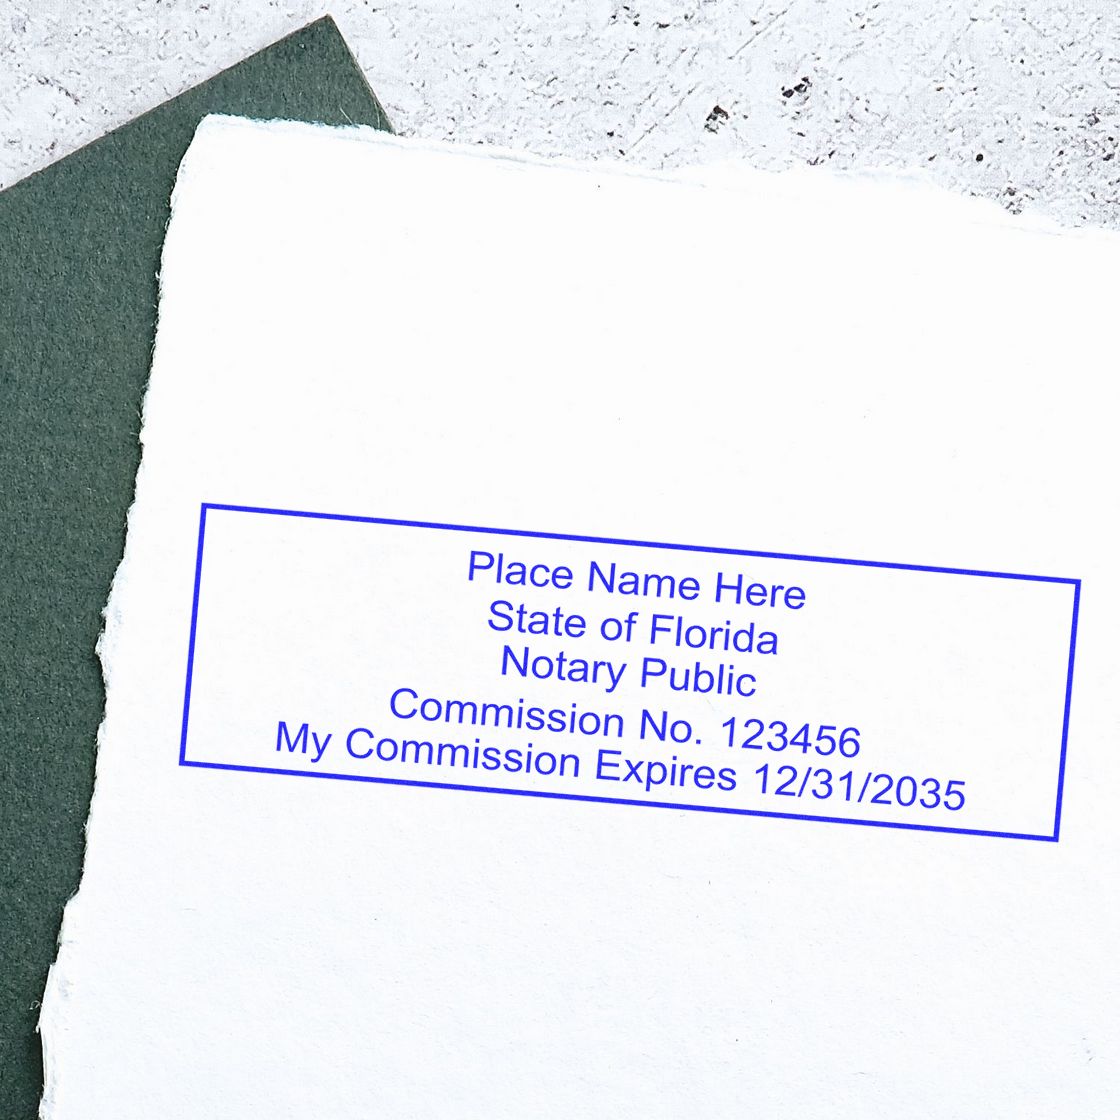 This paper is stamped with a sample imprint of the Wooden Handle Florida Rectangular Notary Public Stamp, signifying its quality and reliability.